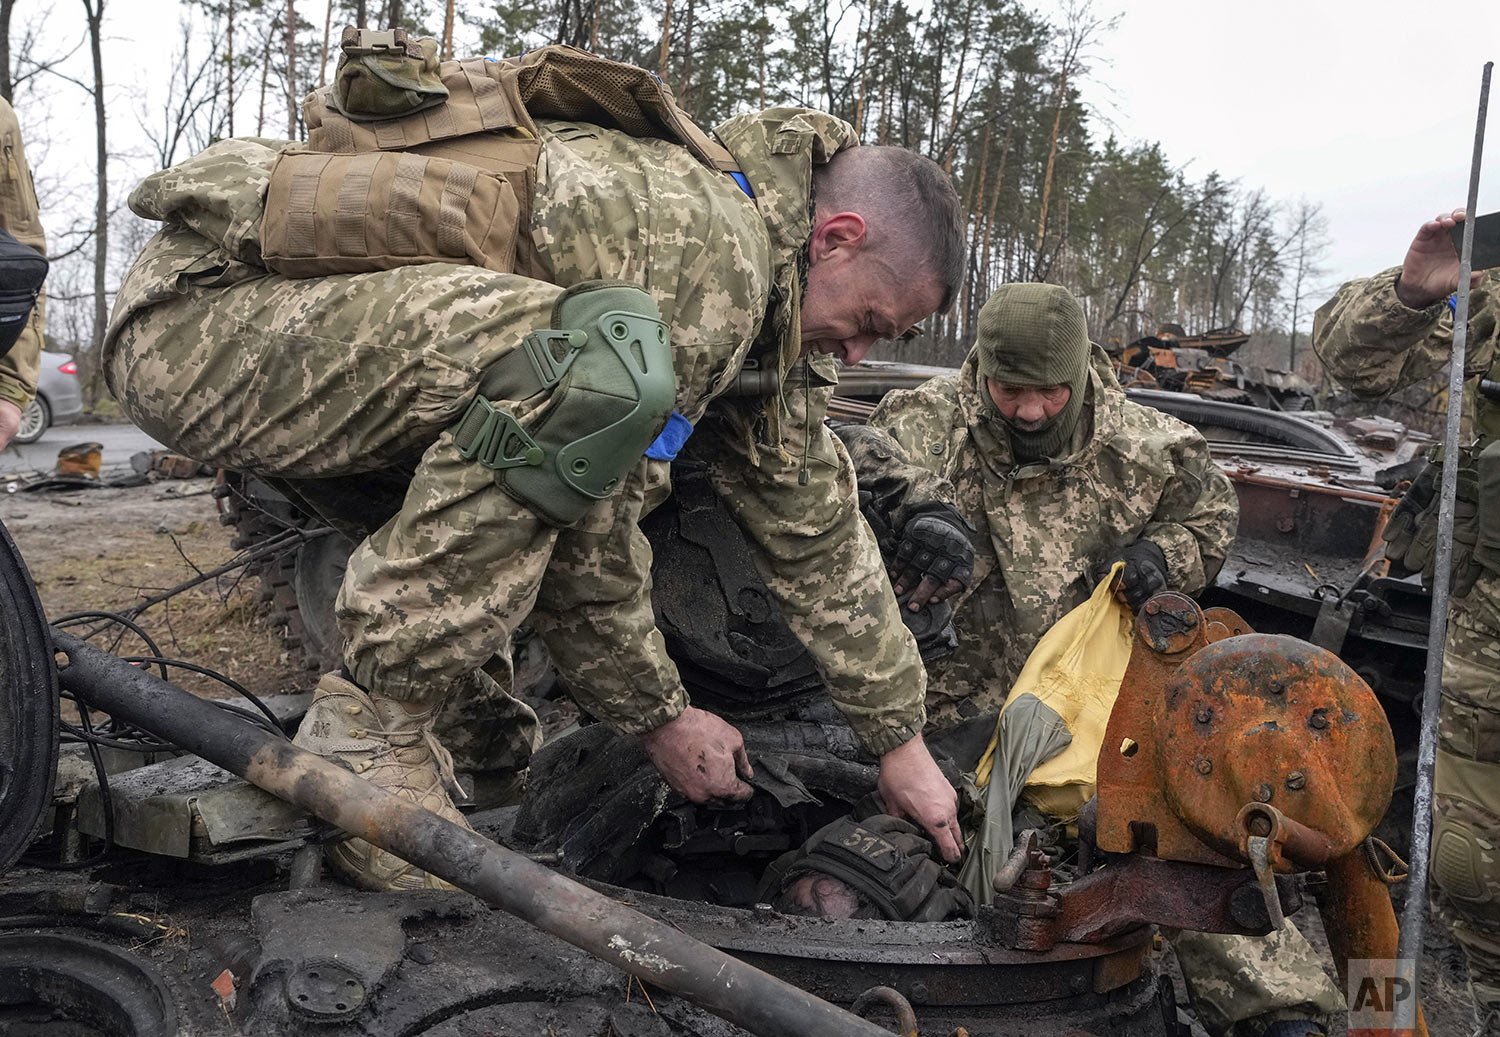  Ukrainian soldiers work to remove the body of a Russian soldier from a destroyed Russian tank, in the village of Dmytrivka close to Kyiv, Ukraine, Saturday, Apr. 2, 2022. (AP Photo/Efrem Lukatsky) 